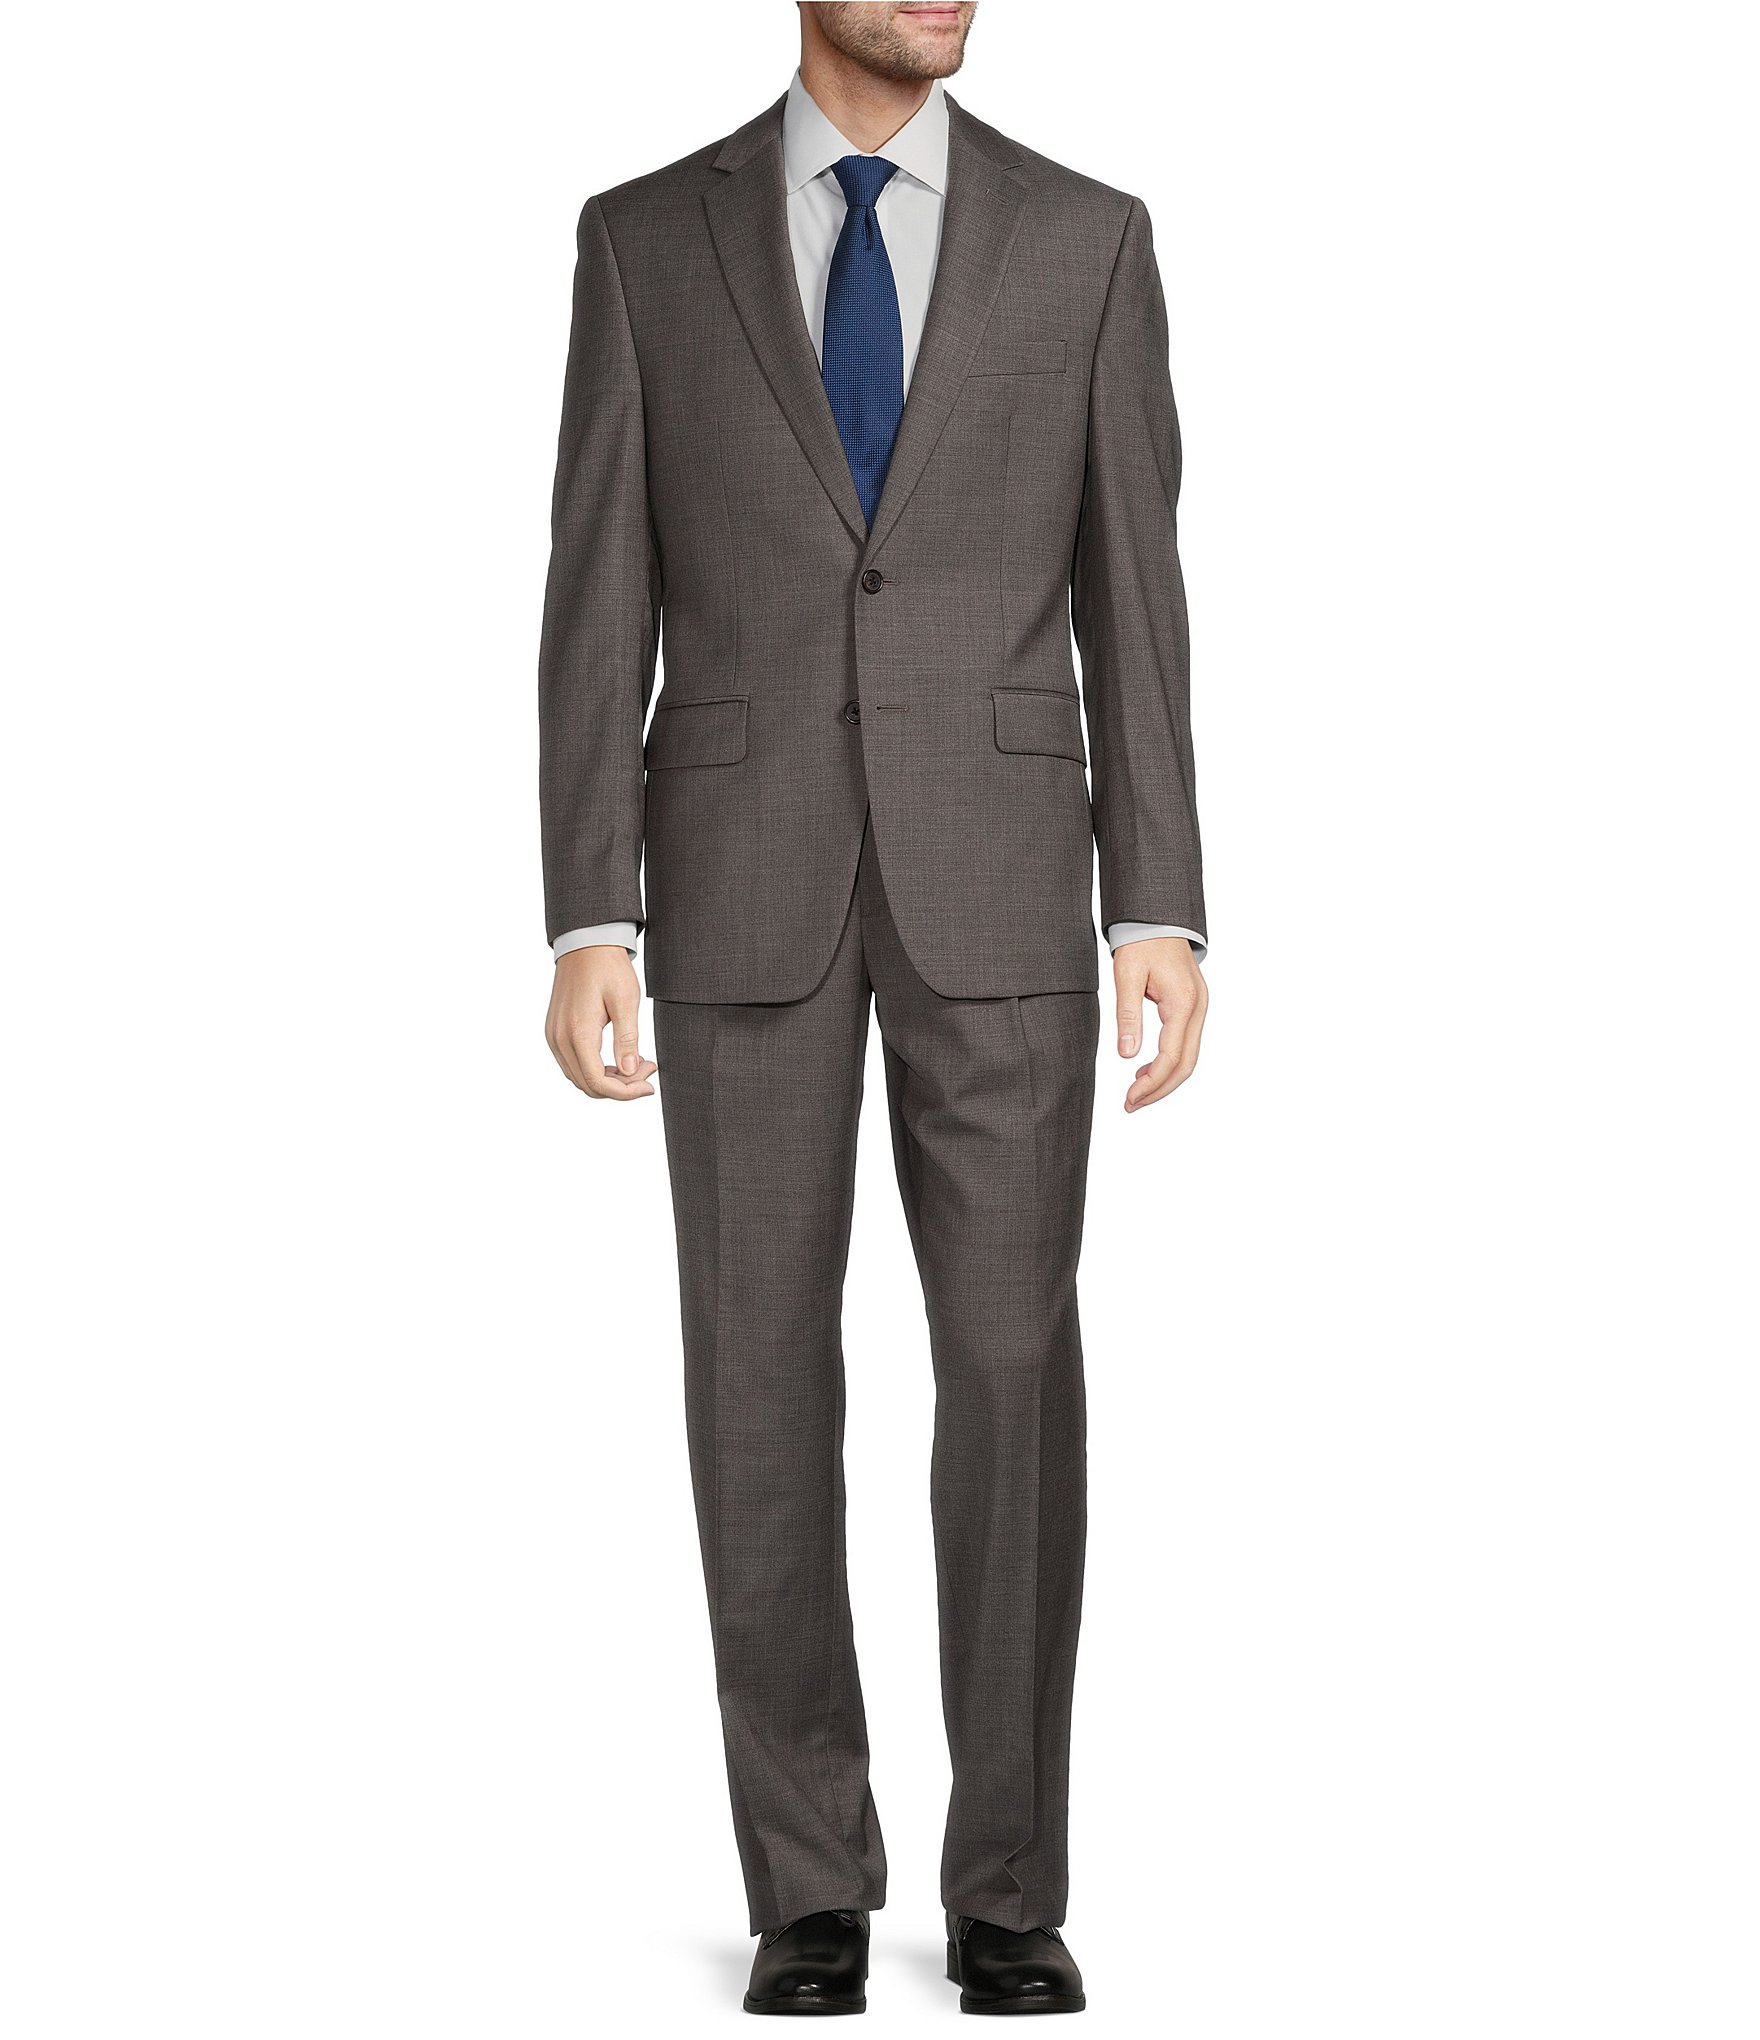 Hickey Freeman Classic Fit Double Pleated Solid 2-Piece Suit | Dillard's